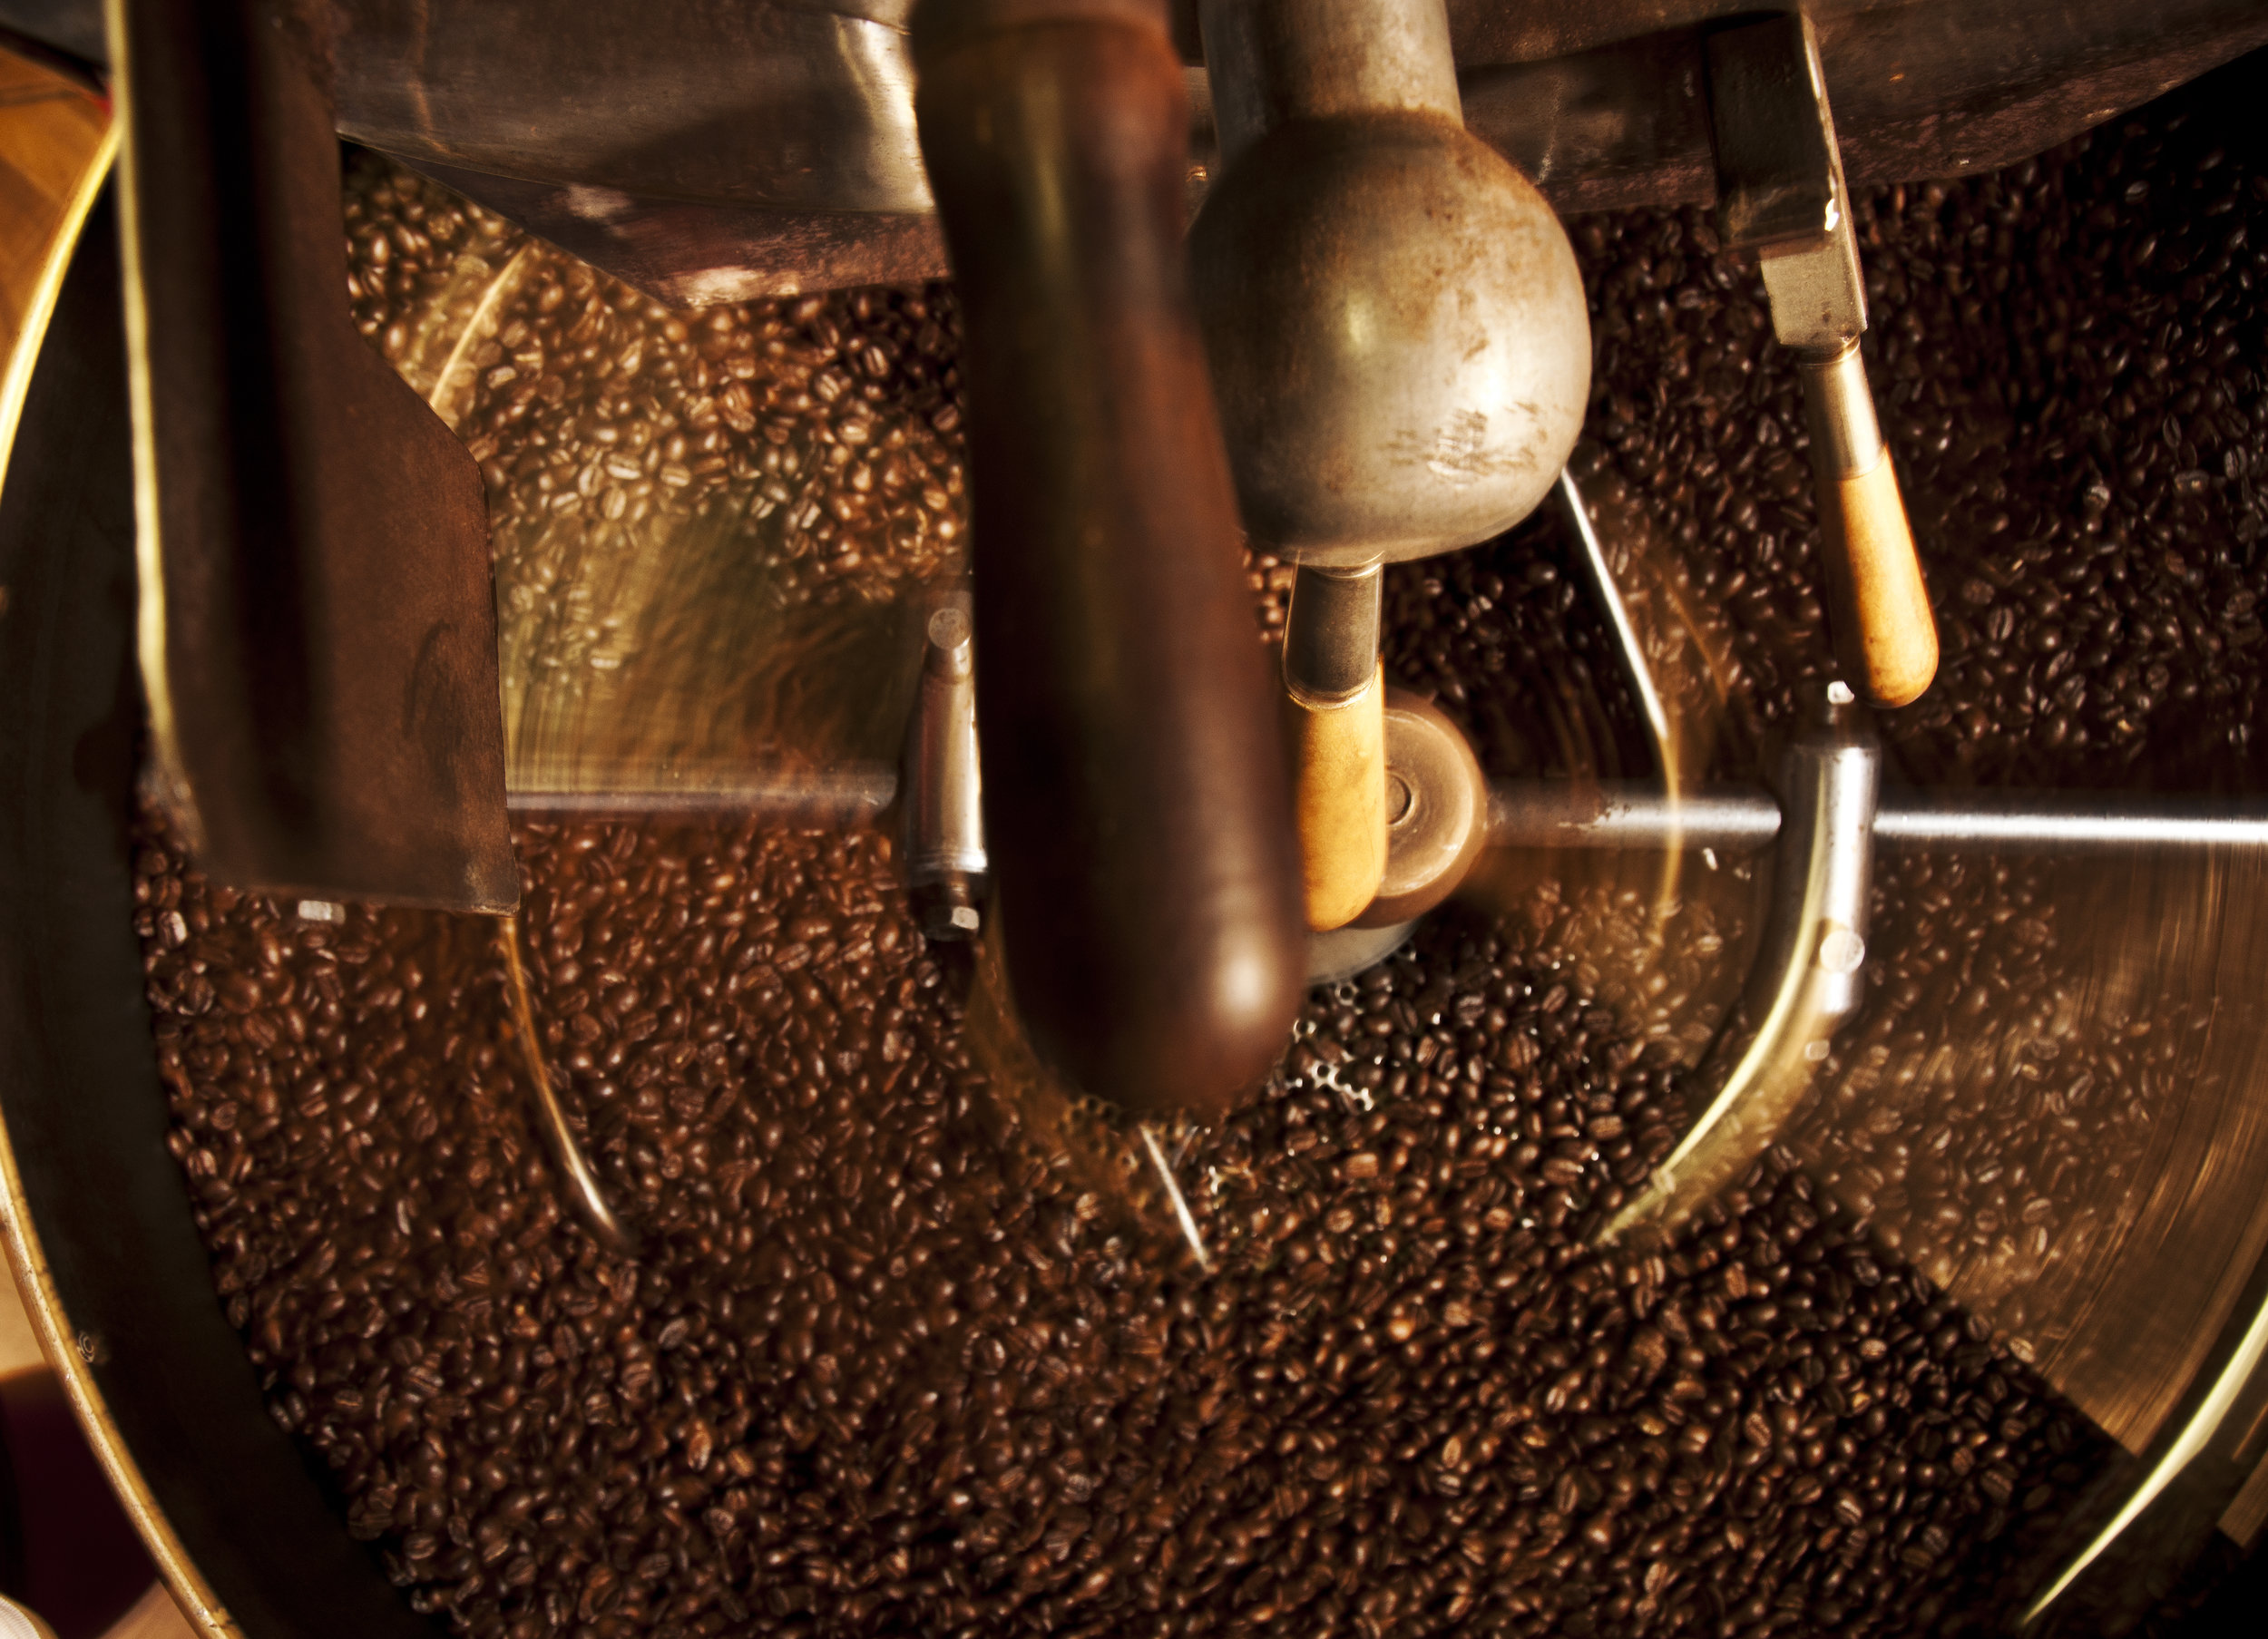 Our coffee is locally roasted on site every few days to ensure peak freshness and flavor in every cup.  [READ MORE…]